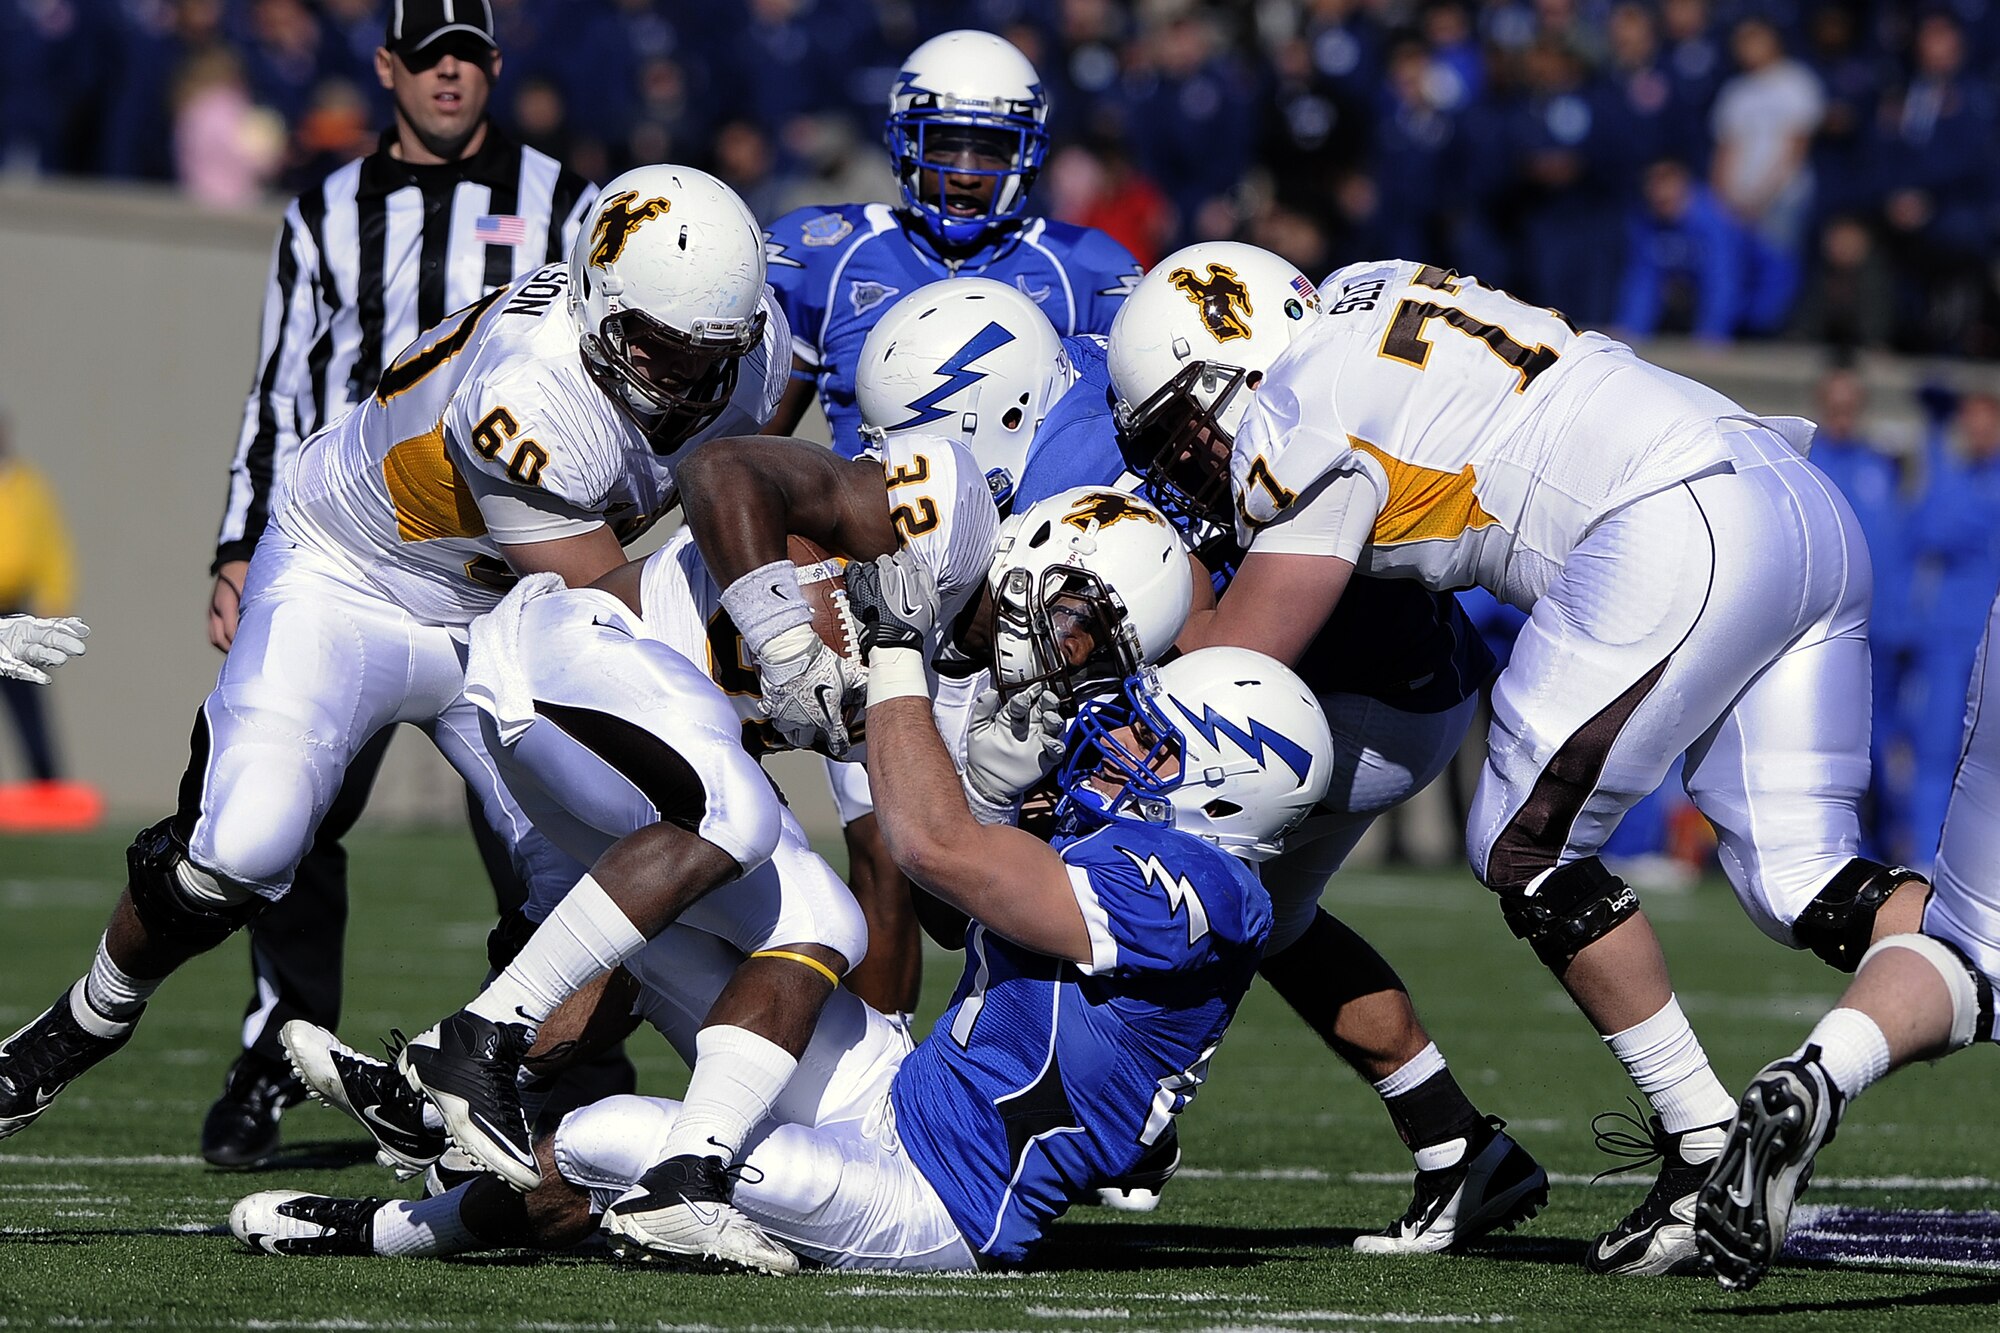 Senior linebacker Brady Amack brings down Wyomings running back Alvester Alexander at the Falcon Stadium Nov. 12, 2011 in Colorado Springs, Colo. The Cowboys defeated Air Force 25-17. (U.S. Air Force photo/Mike Kaplan)